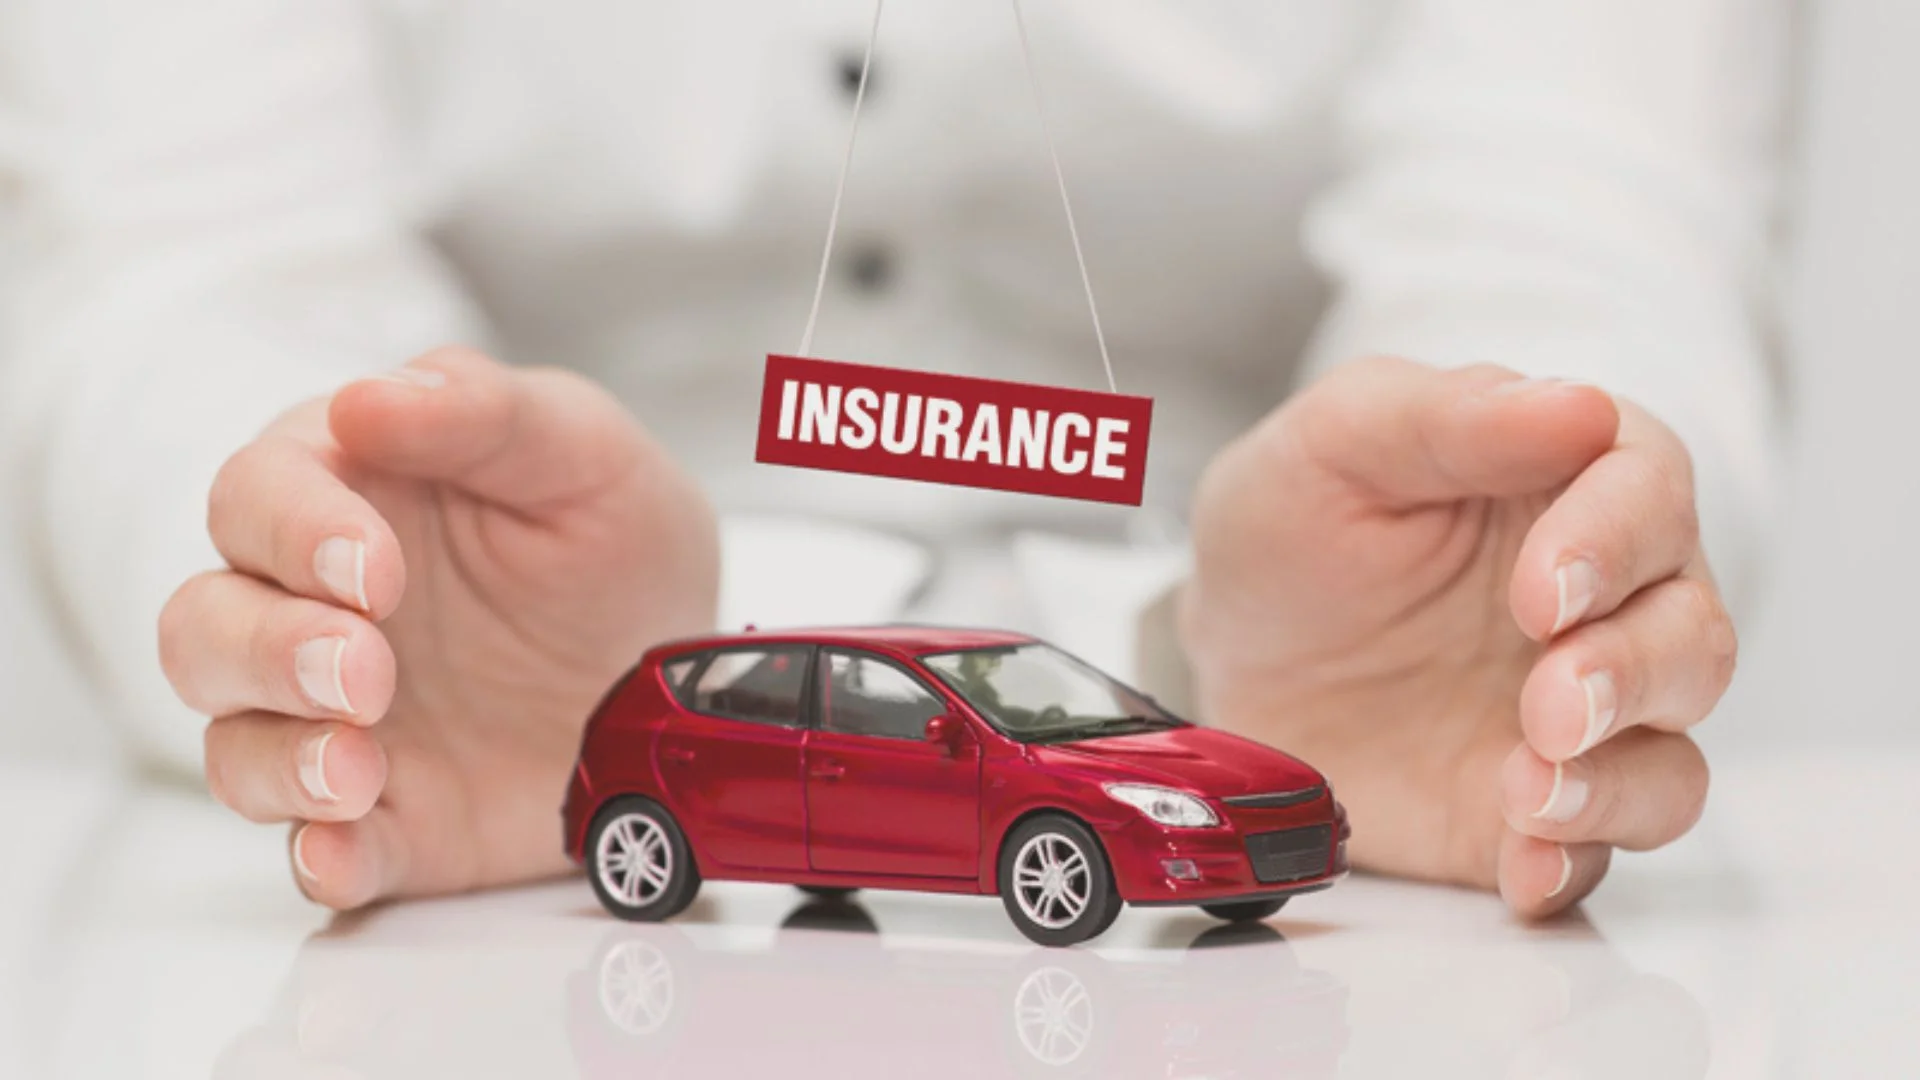 How to Choose the Best Auto Insurance Policy